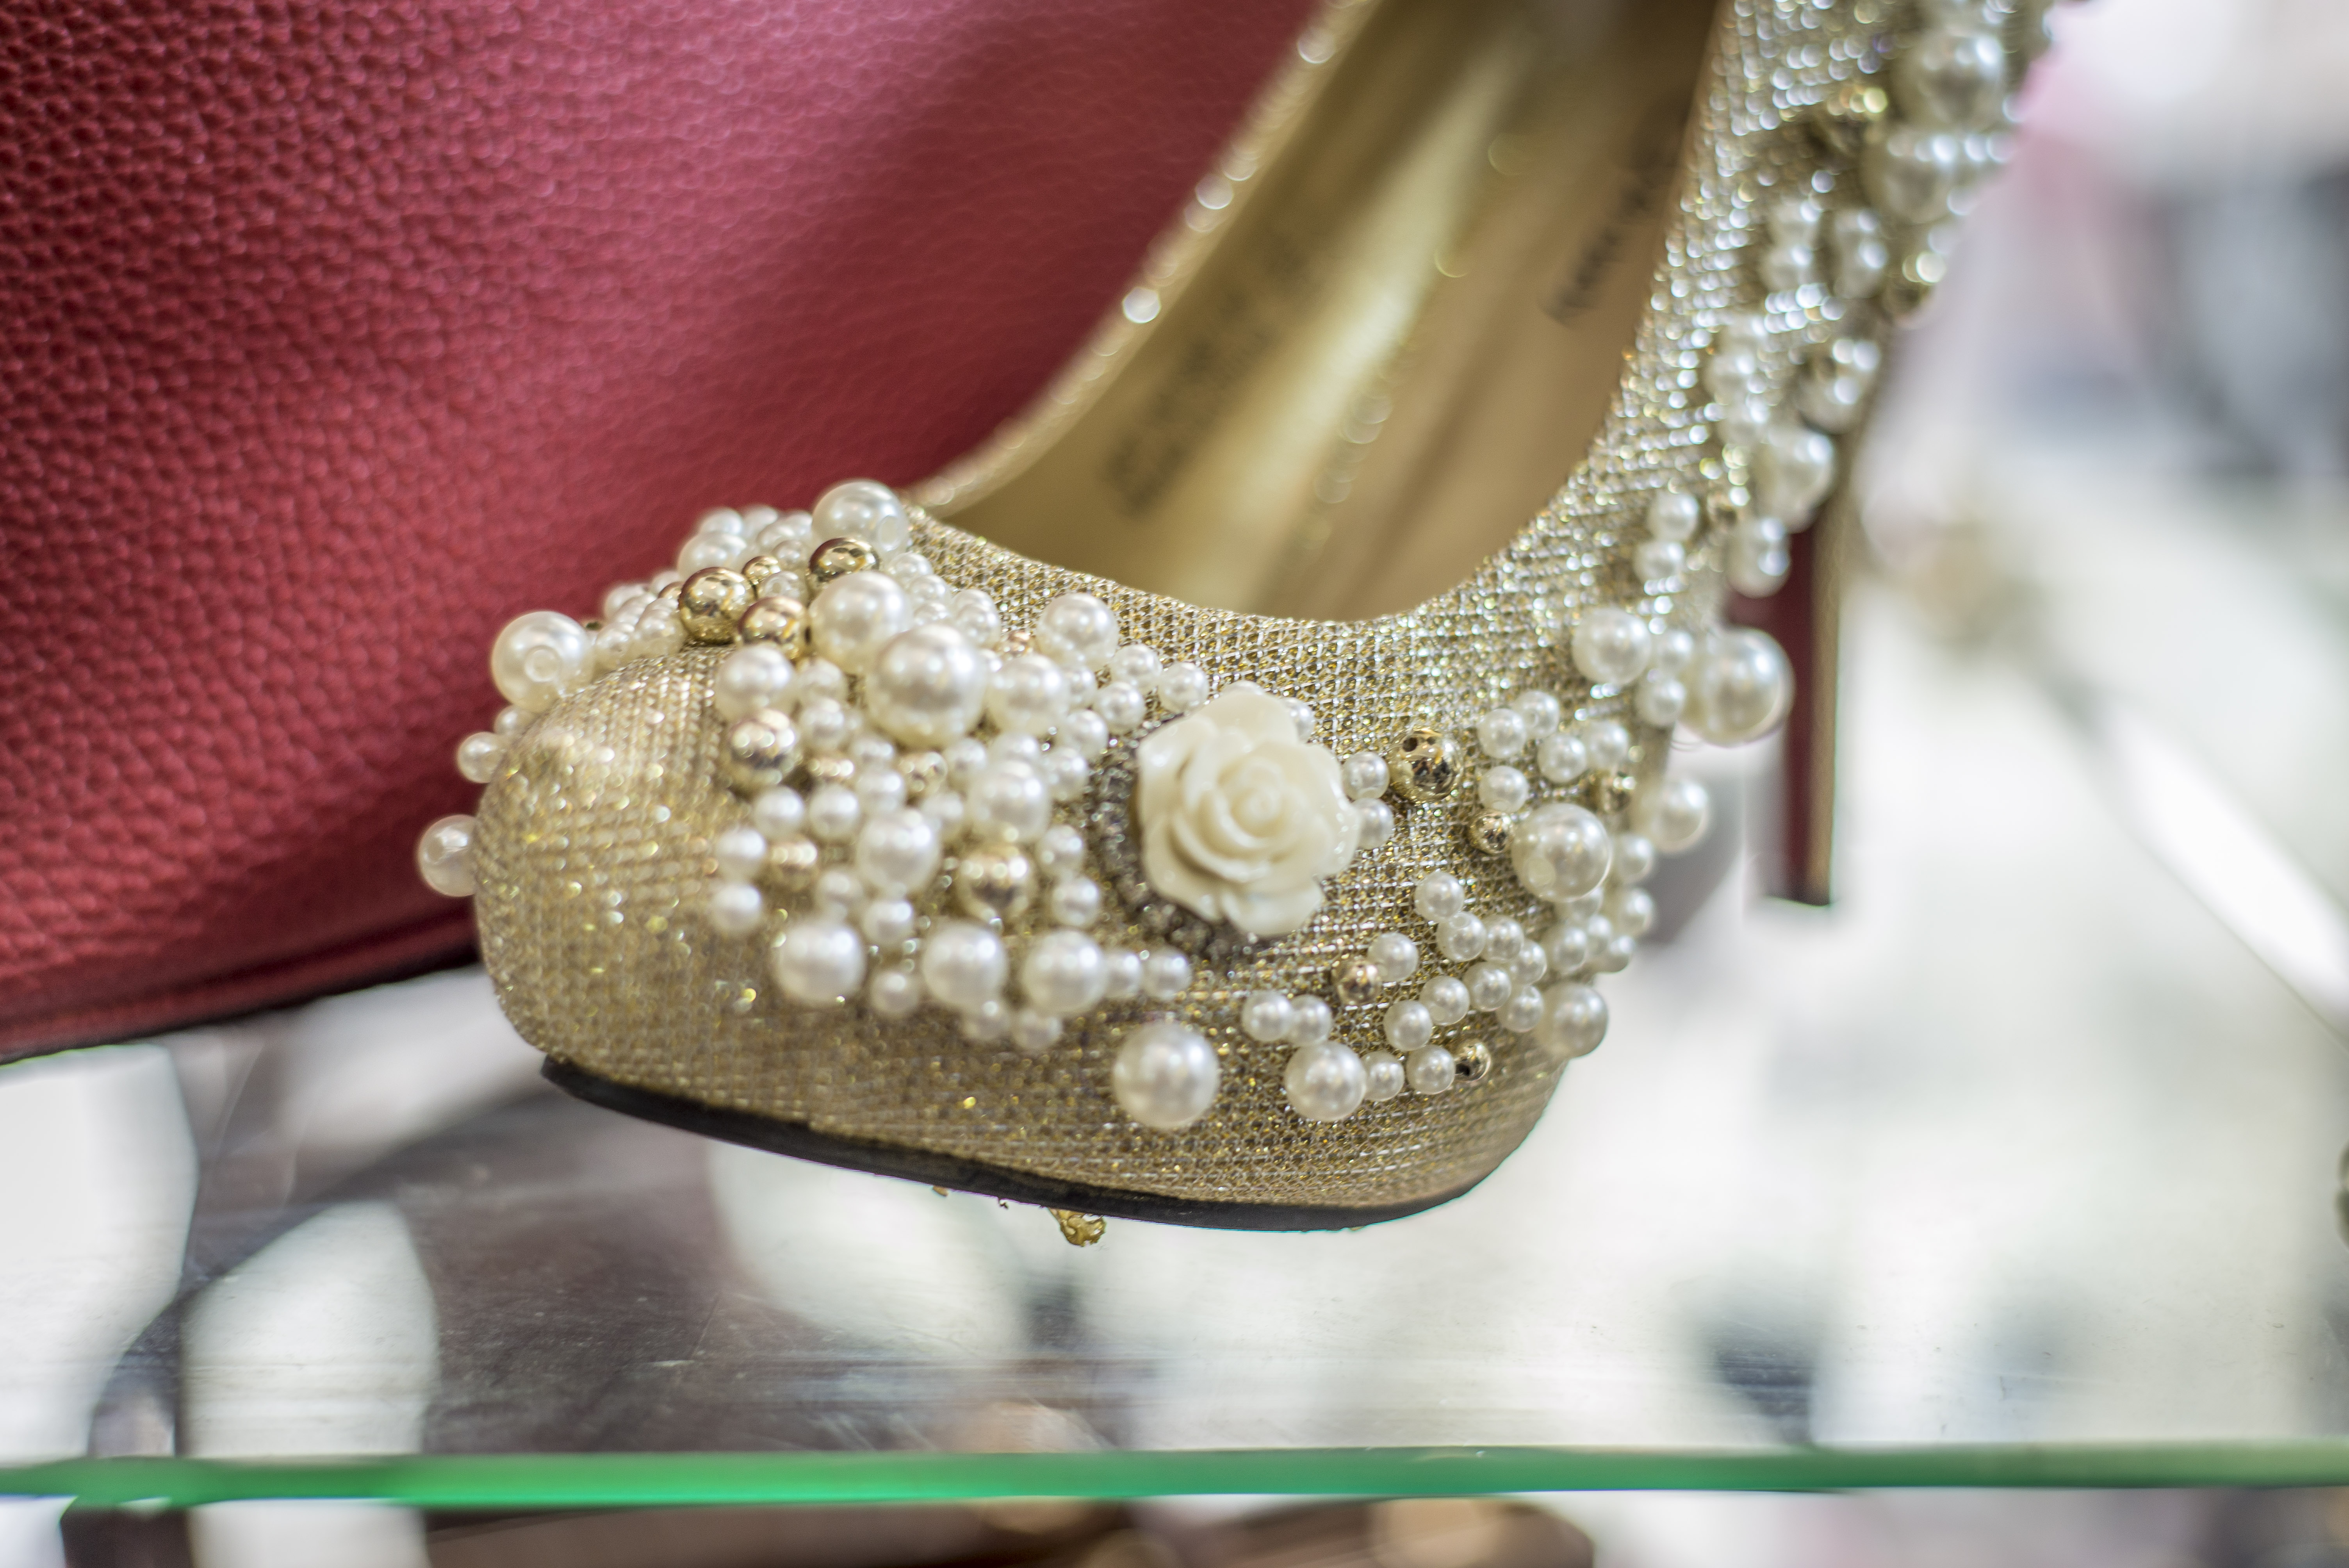 8 Ridiculous Shoes We Found in Downtown Cairo